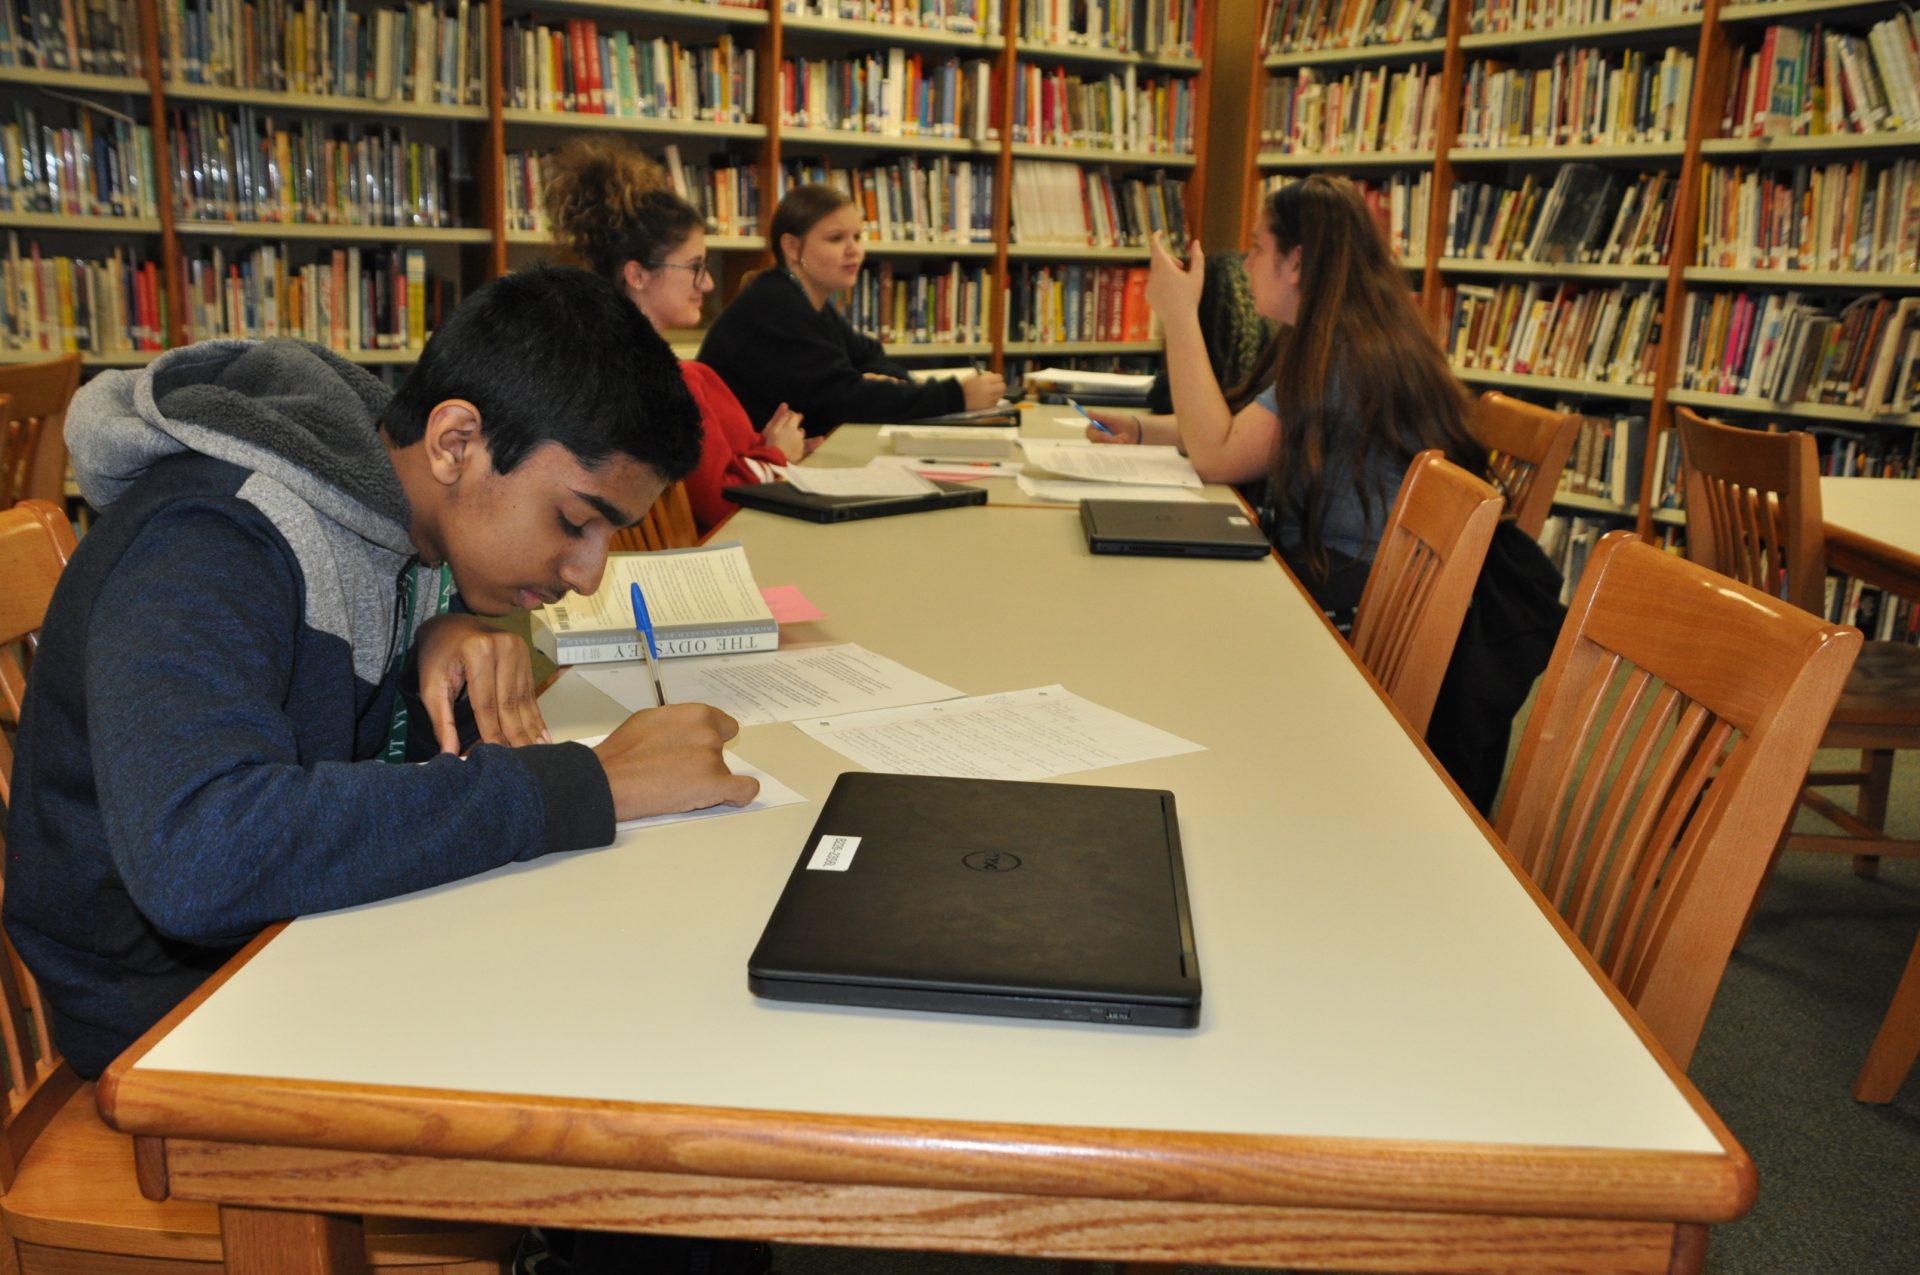 Students writing and conversing in the library